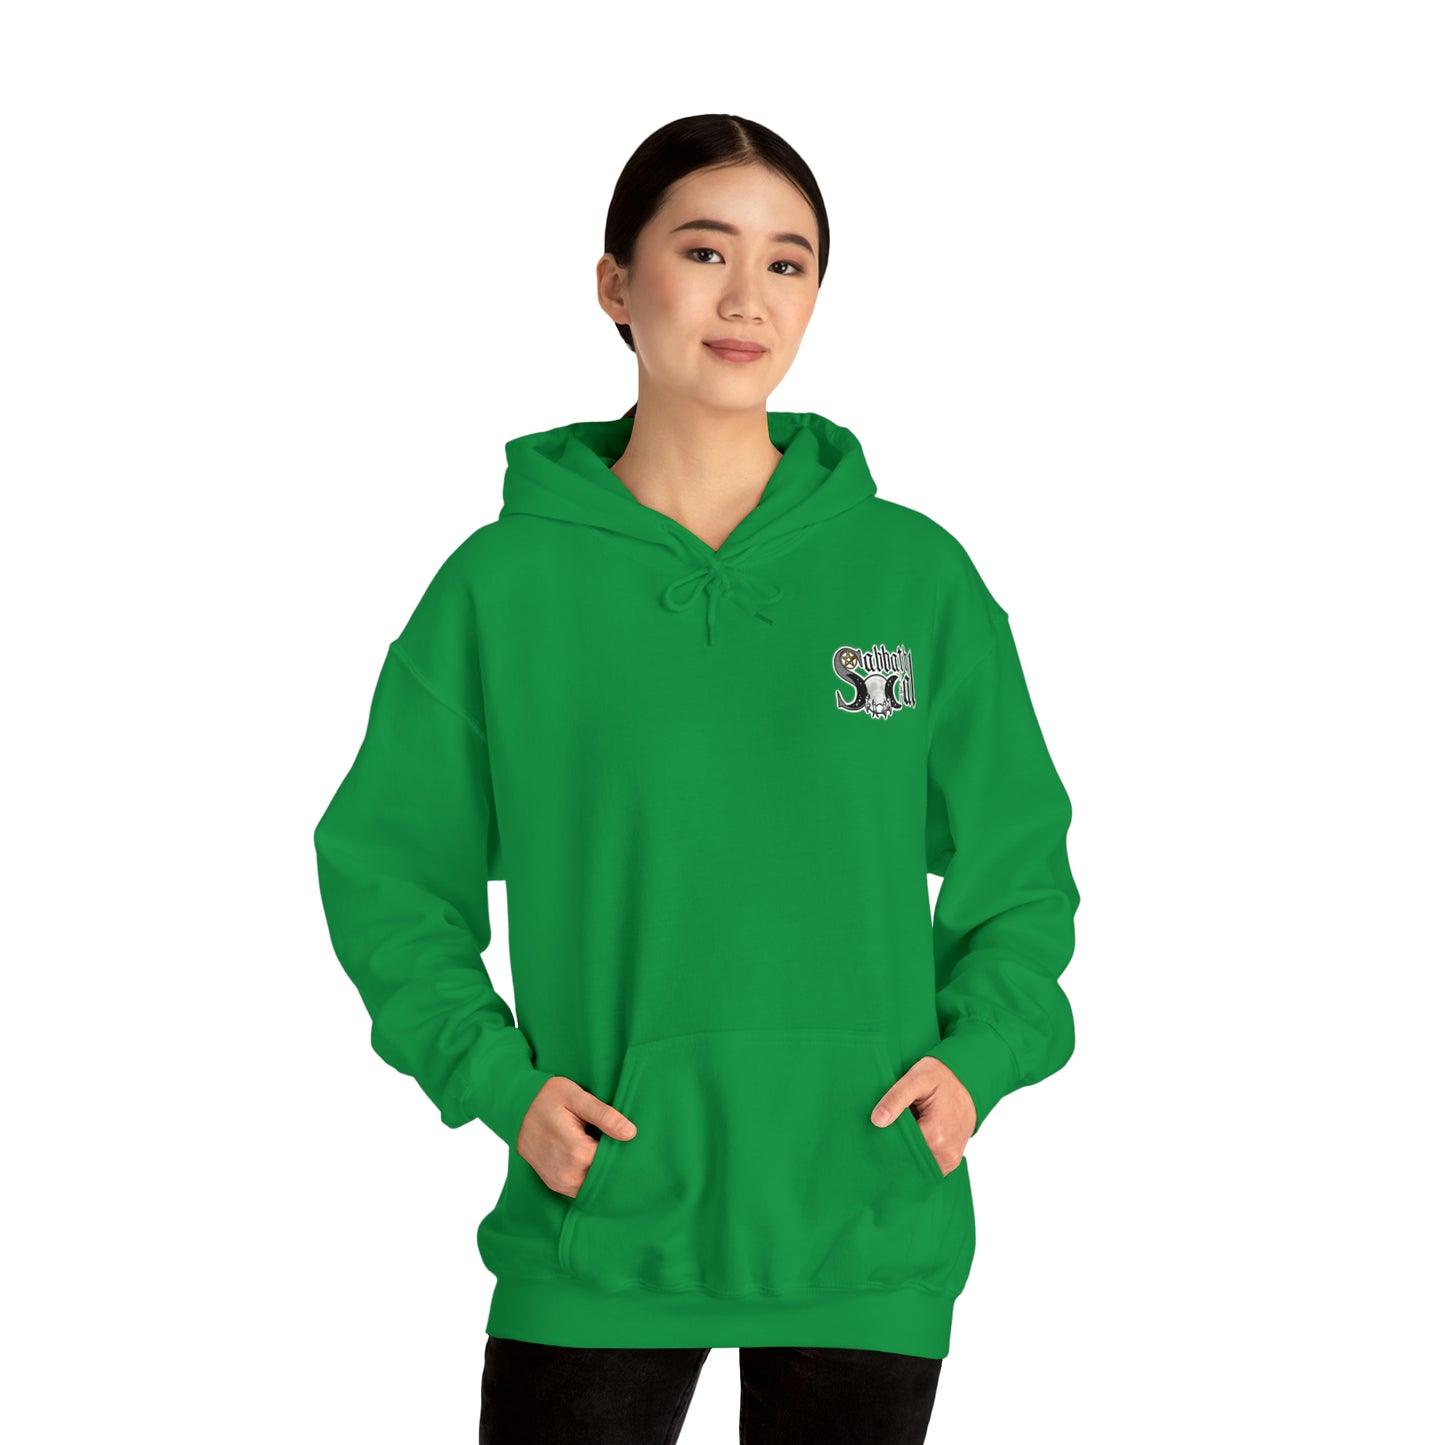 Double Double Toil and Trouble Hooded Sweatshirt